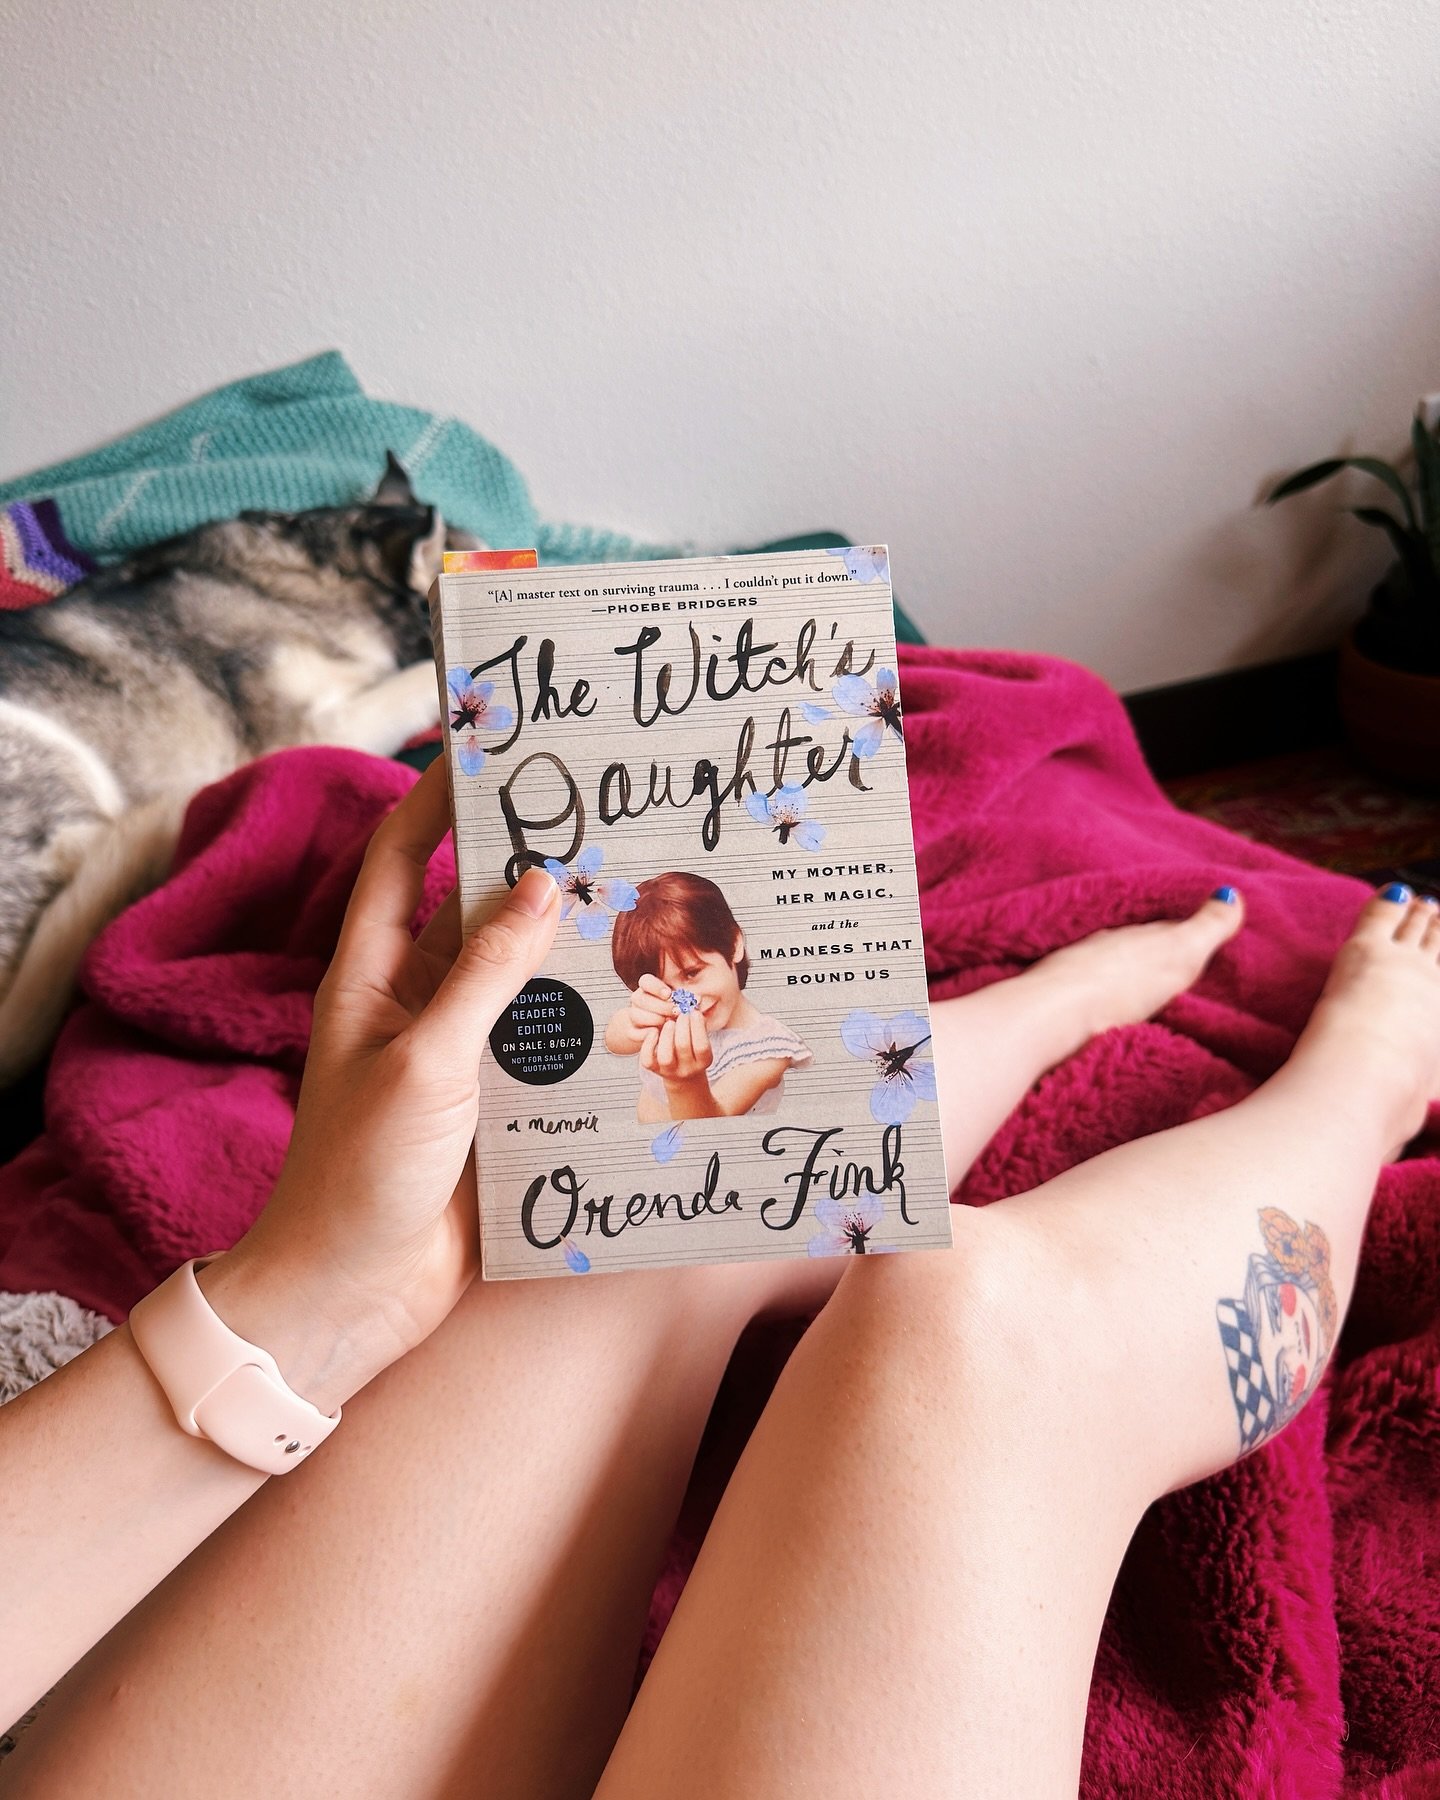 I&rsquo;m a sucker for a memoir, especially if it has a mother-daughter theme. 💗📖

Very much enjoying this one by @orendafink so far! 

What are some of your favorite memoirs? 👀✨